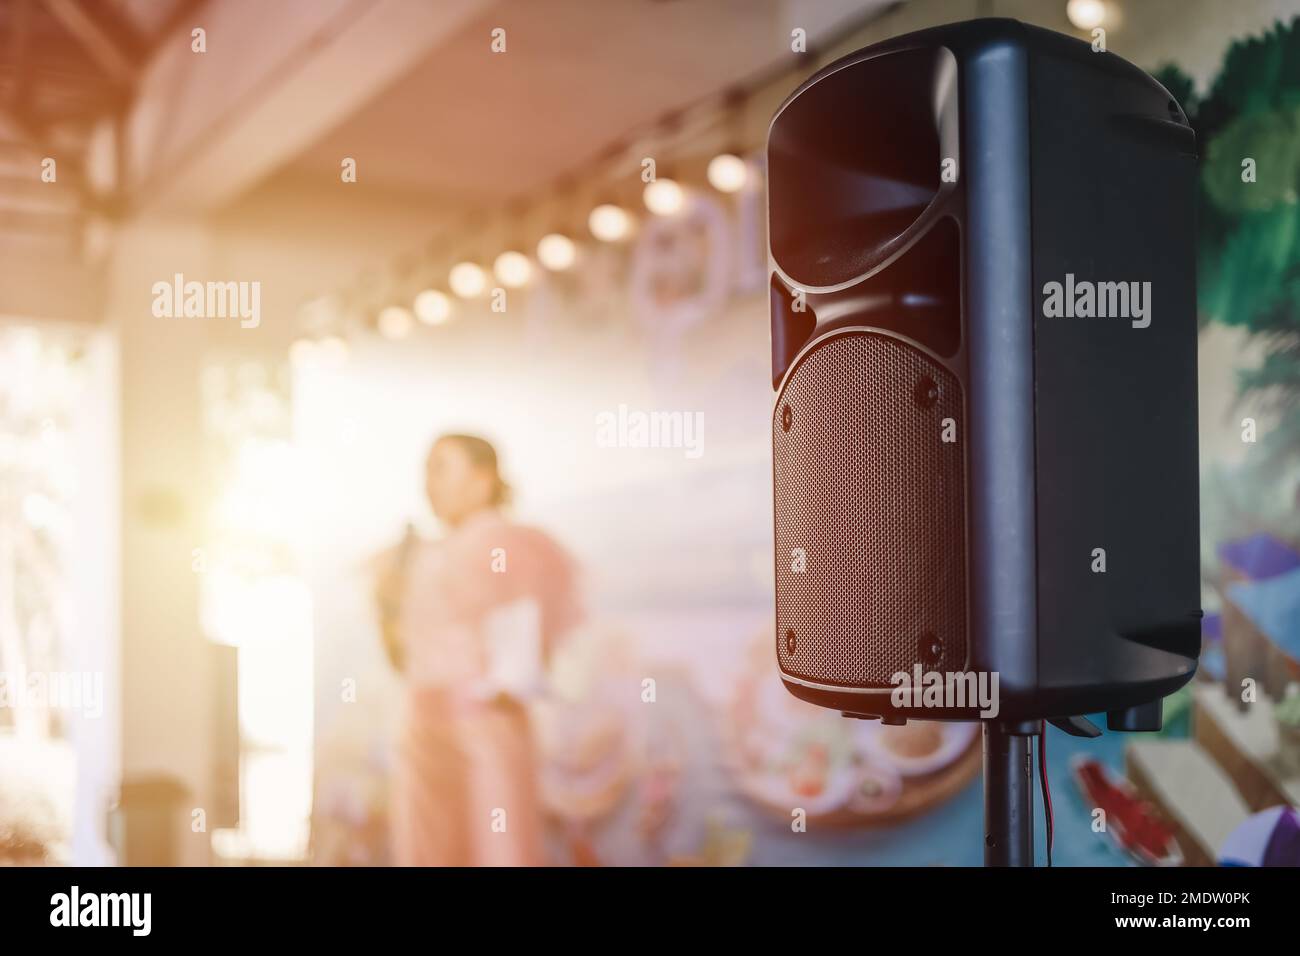 sound speaker at stage side music entertainmaent technology device Stock Photo